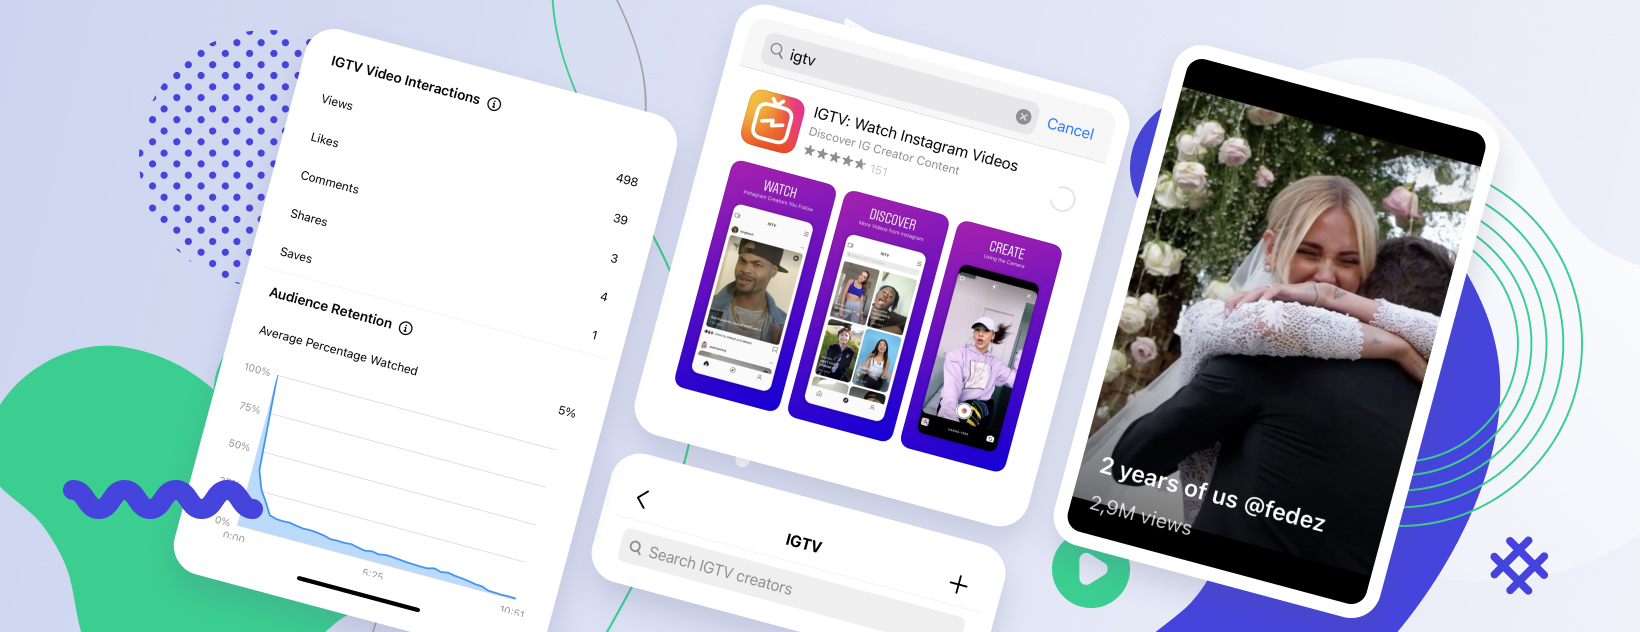 How to use IGTV to gain followers in 2021 (step-by-step guide to a highly-viewed video channel on Instagram)